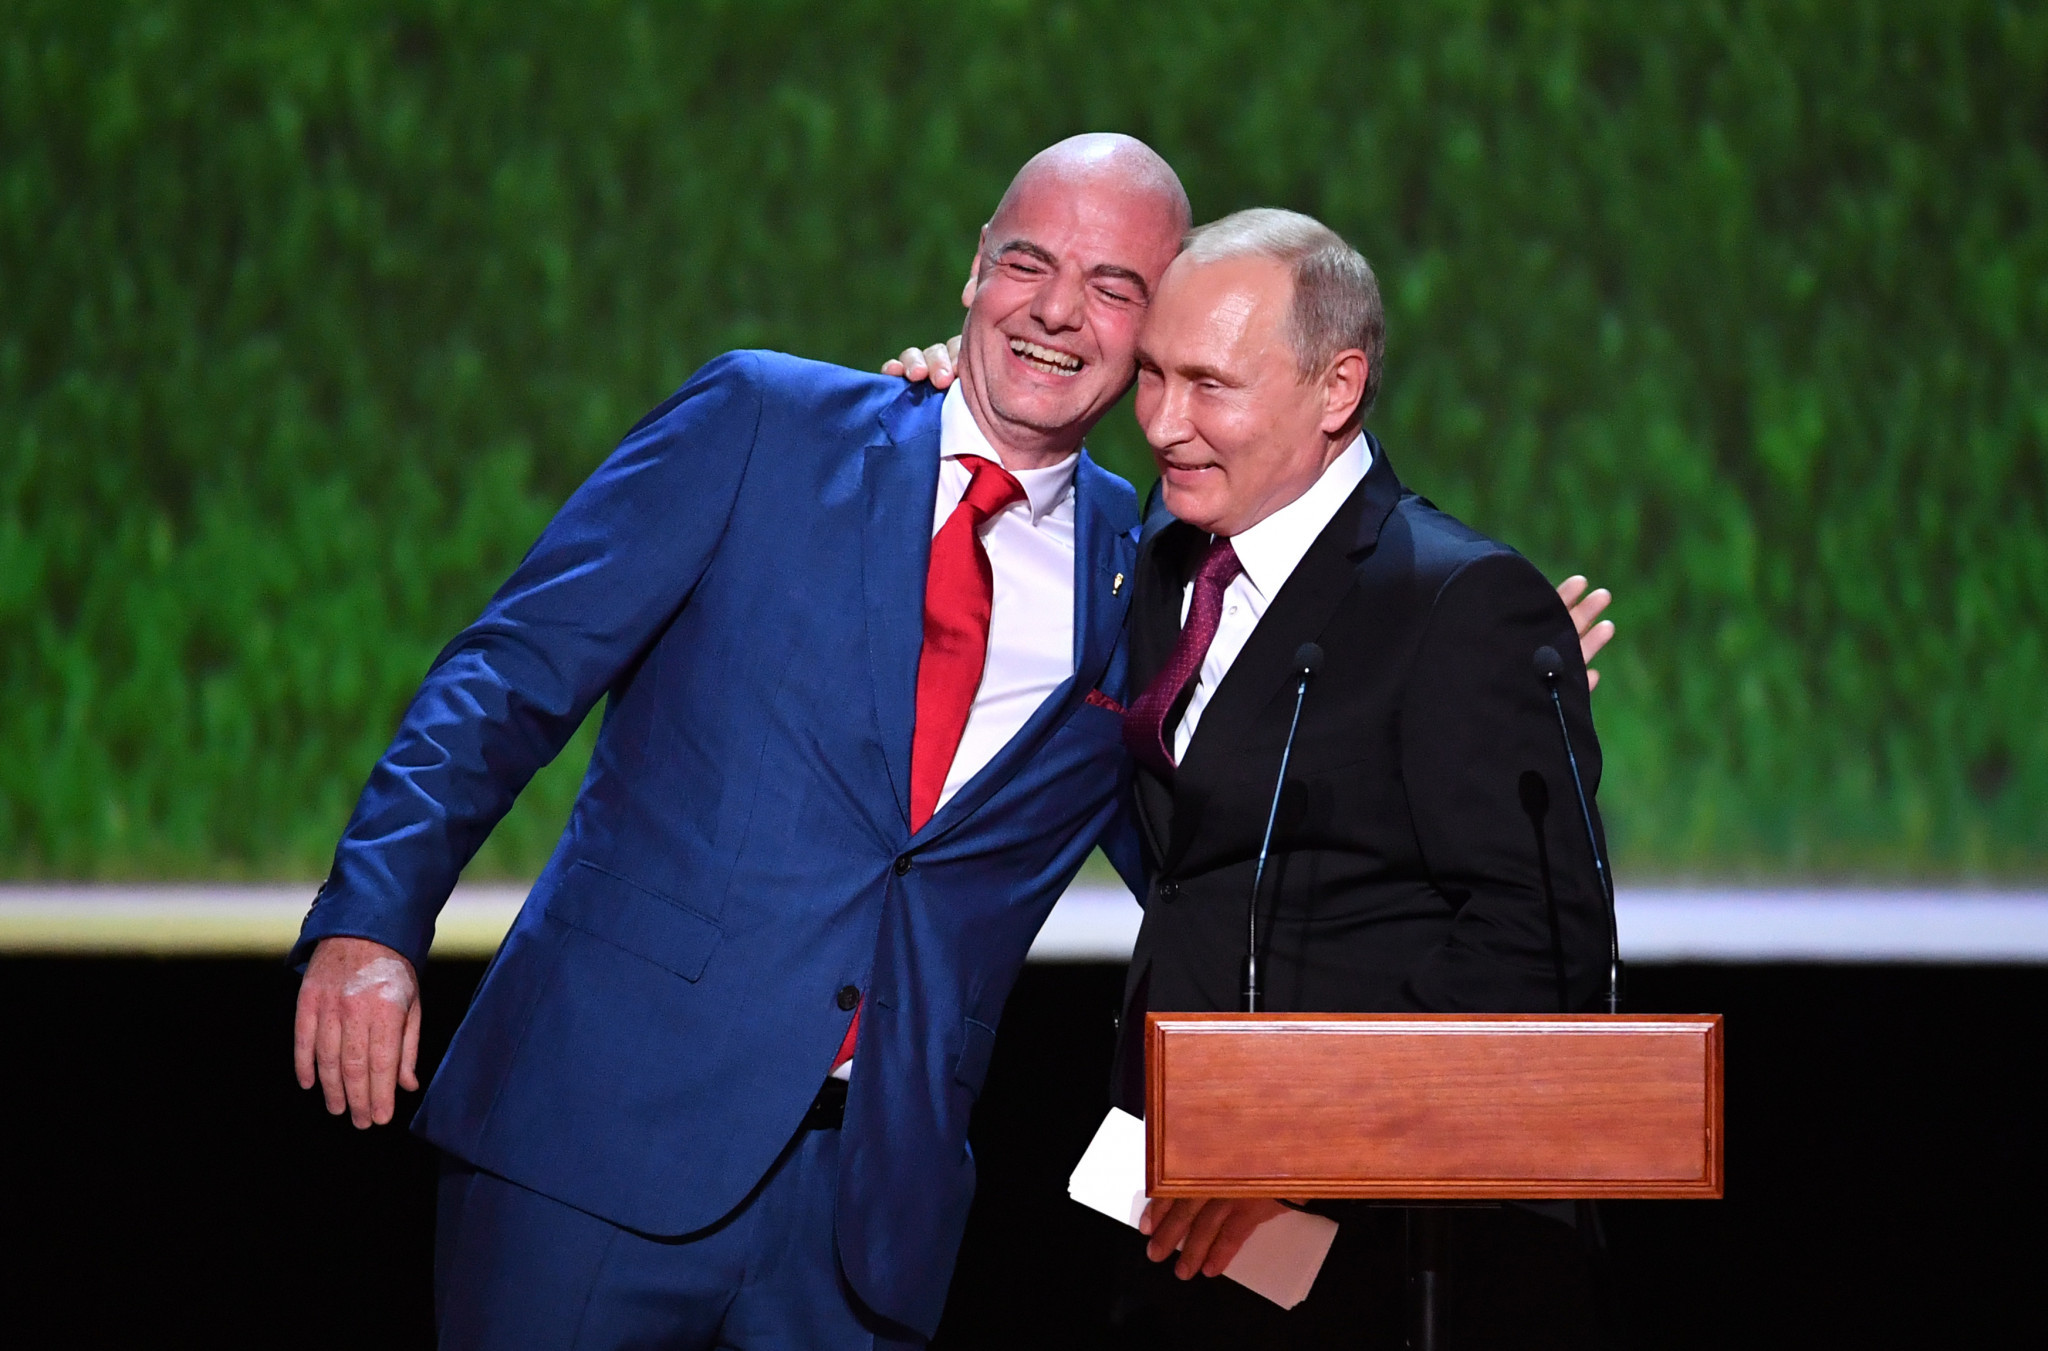 FIFA President Gianni Infantino, left, has previously seemed to revel in his close relationship with Vladimir Putin ©Getty Images